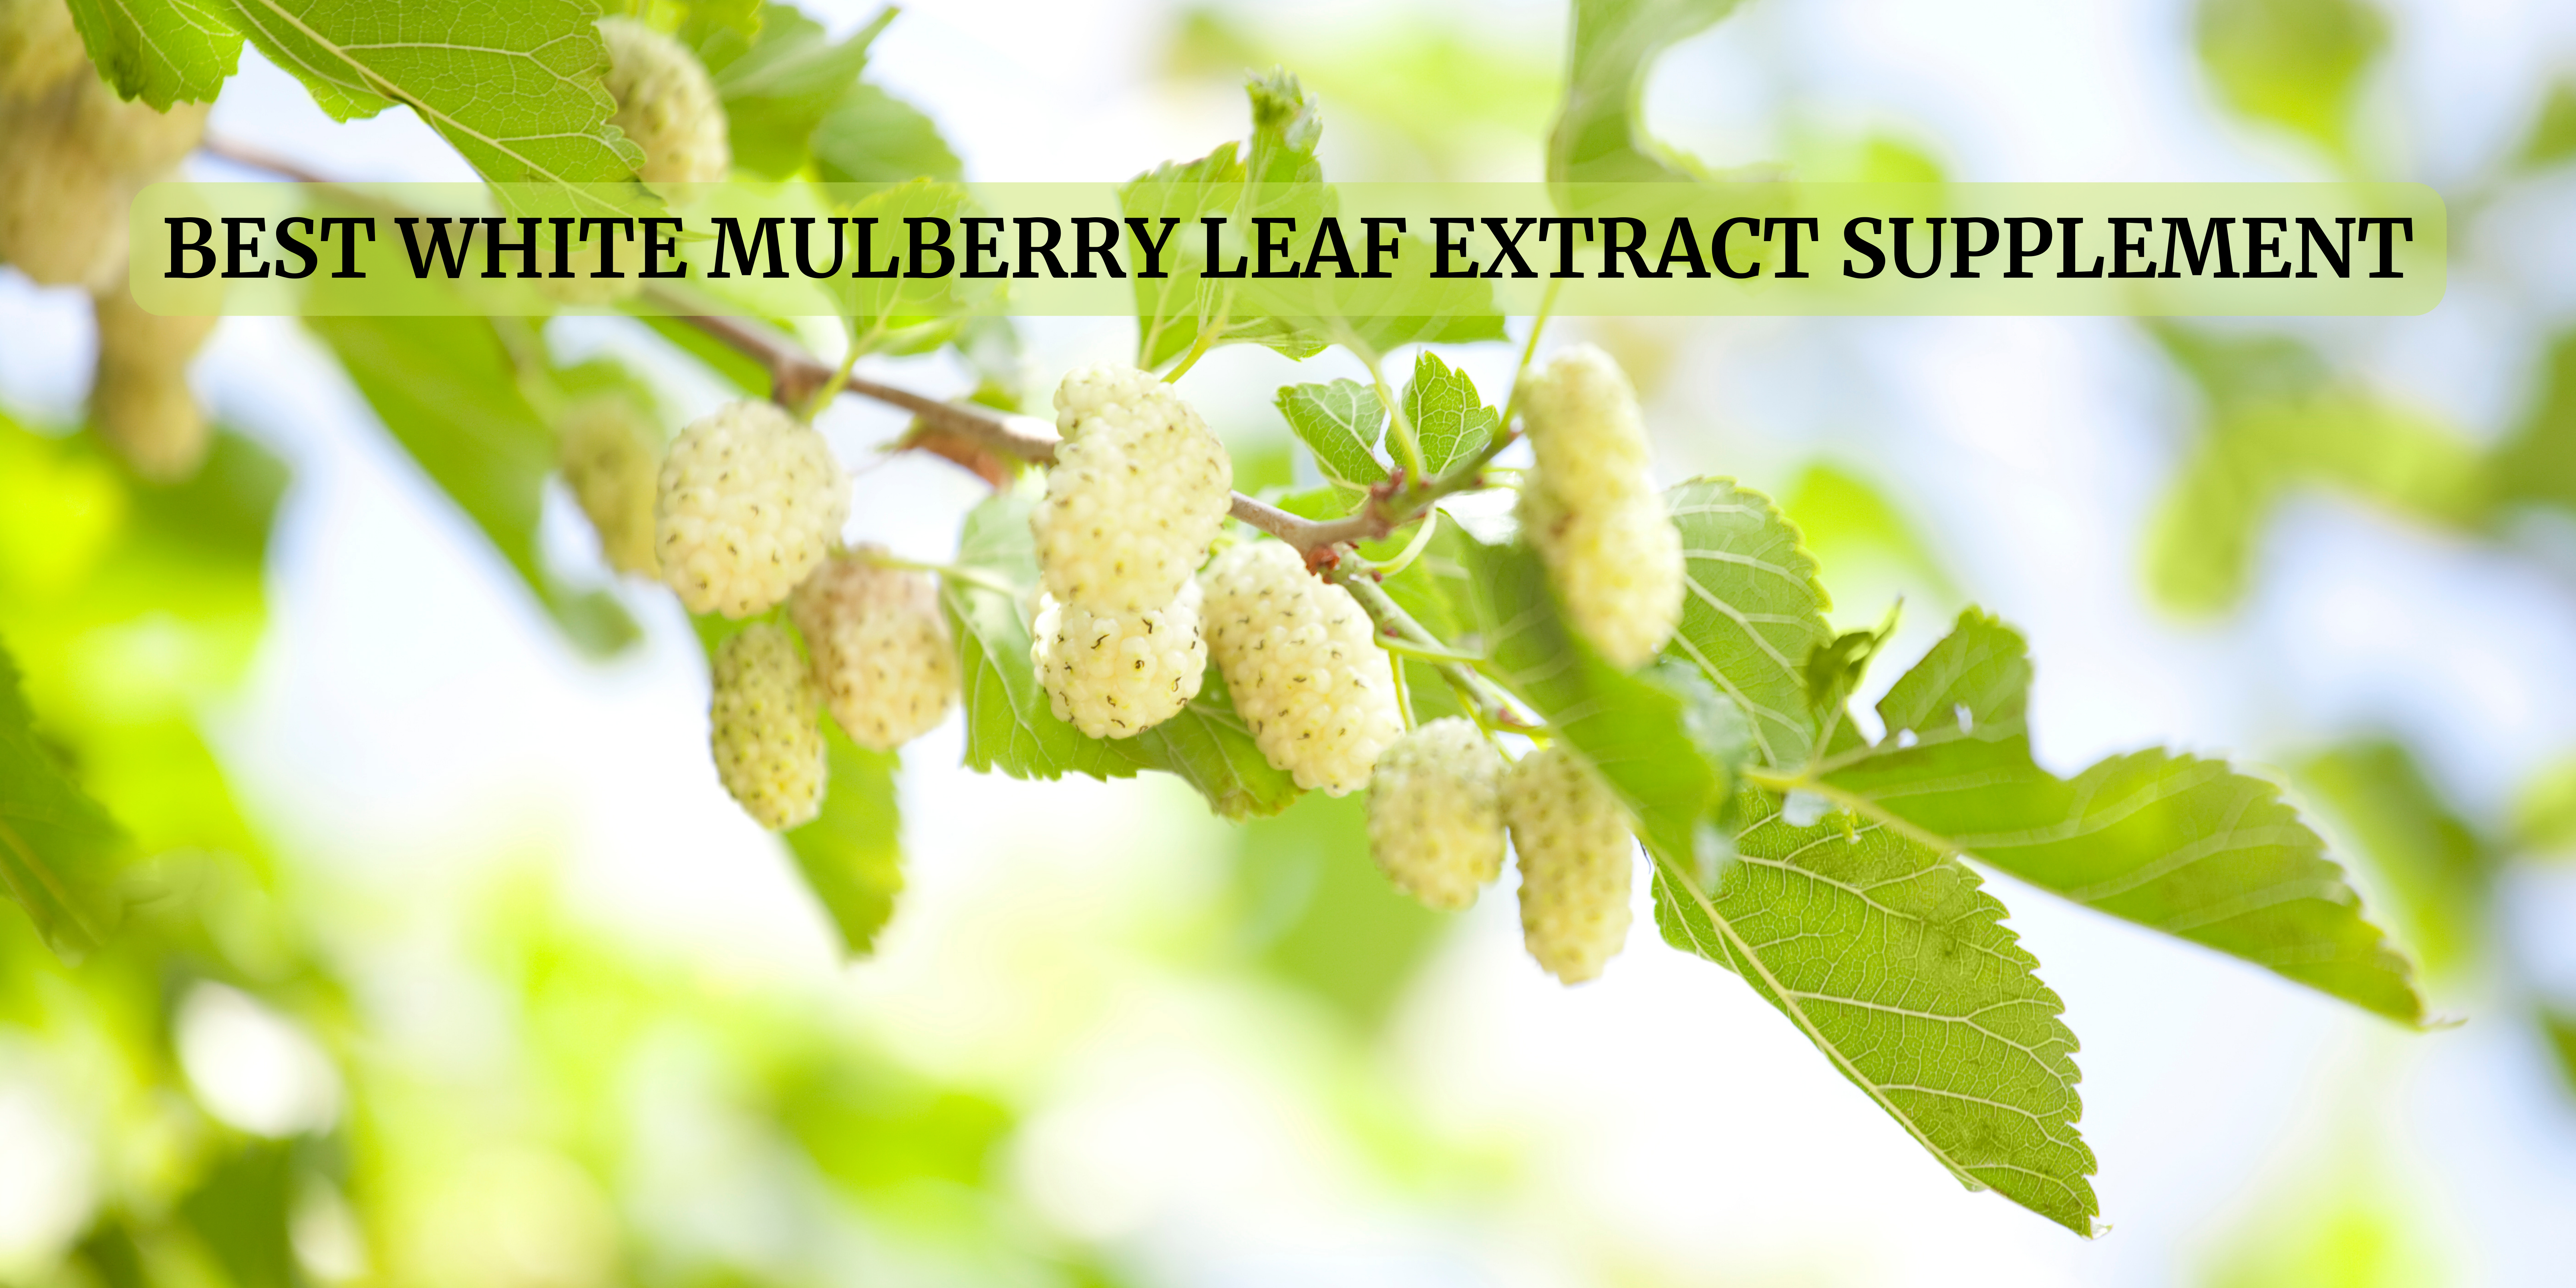 white mulberry leaf extract supplement in UK